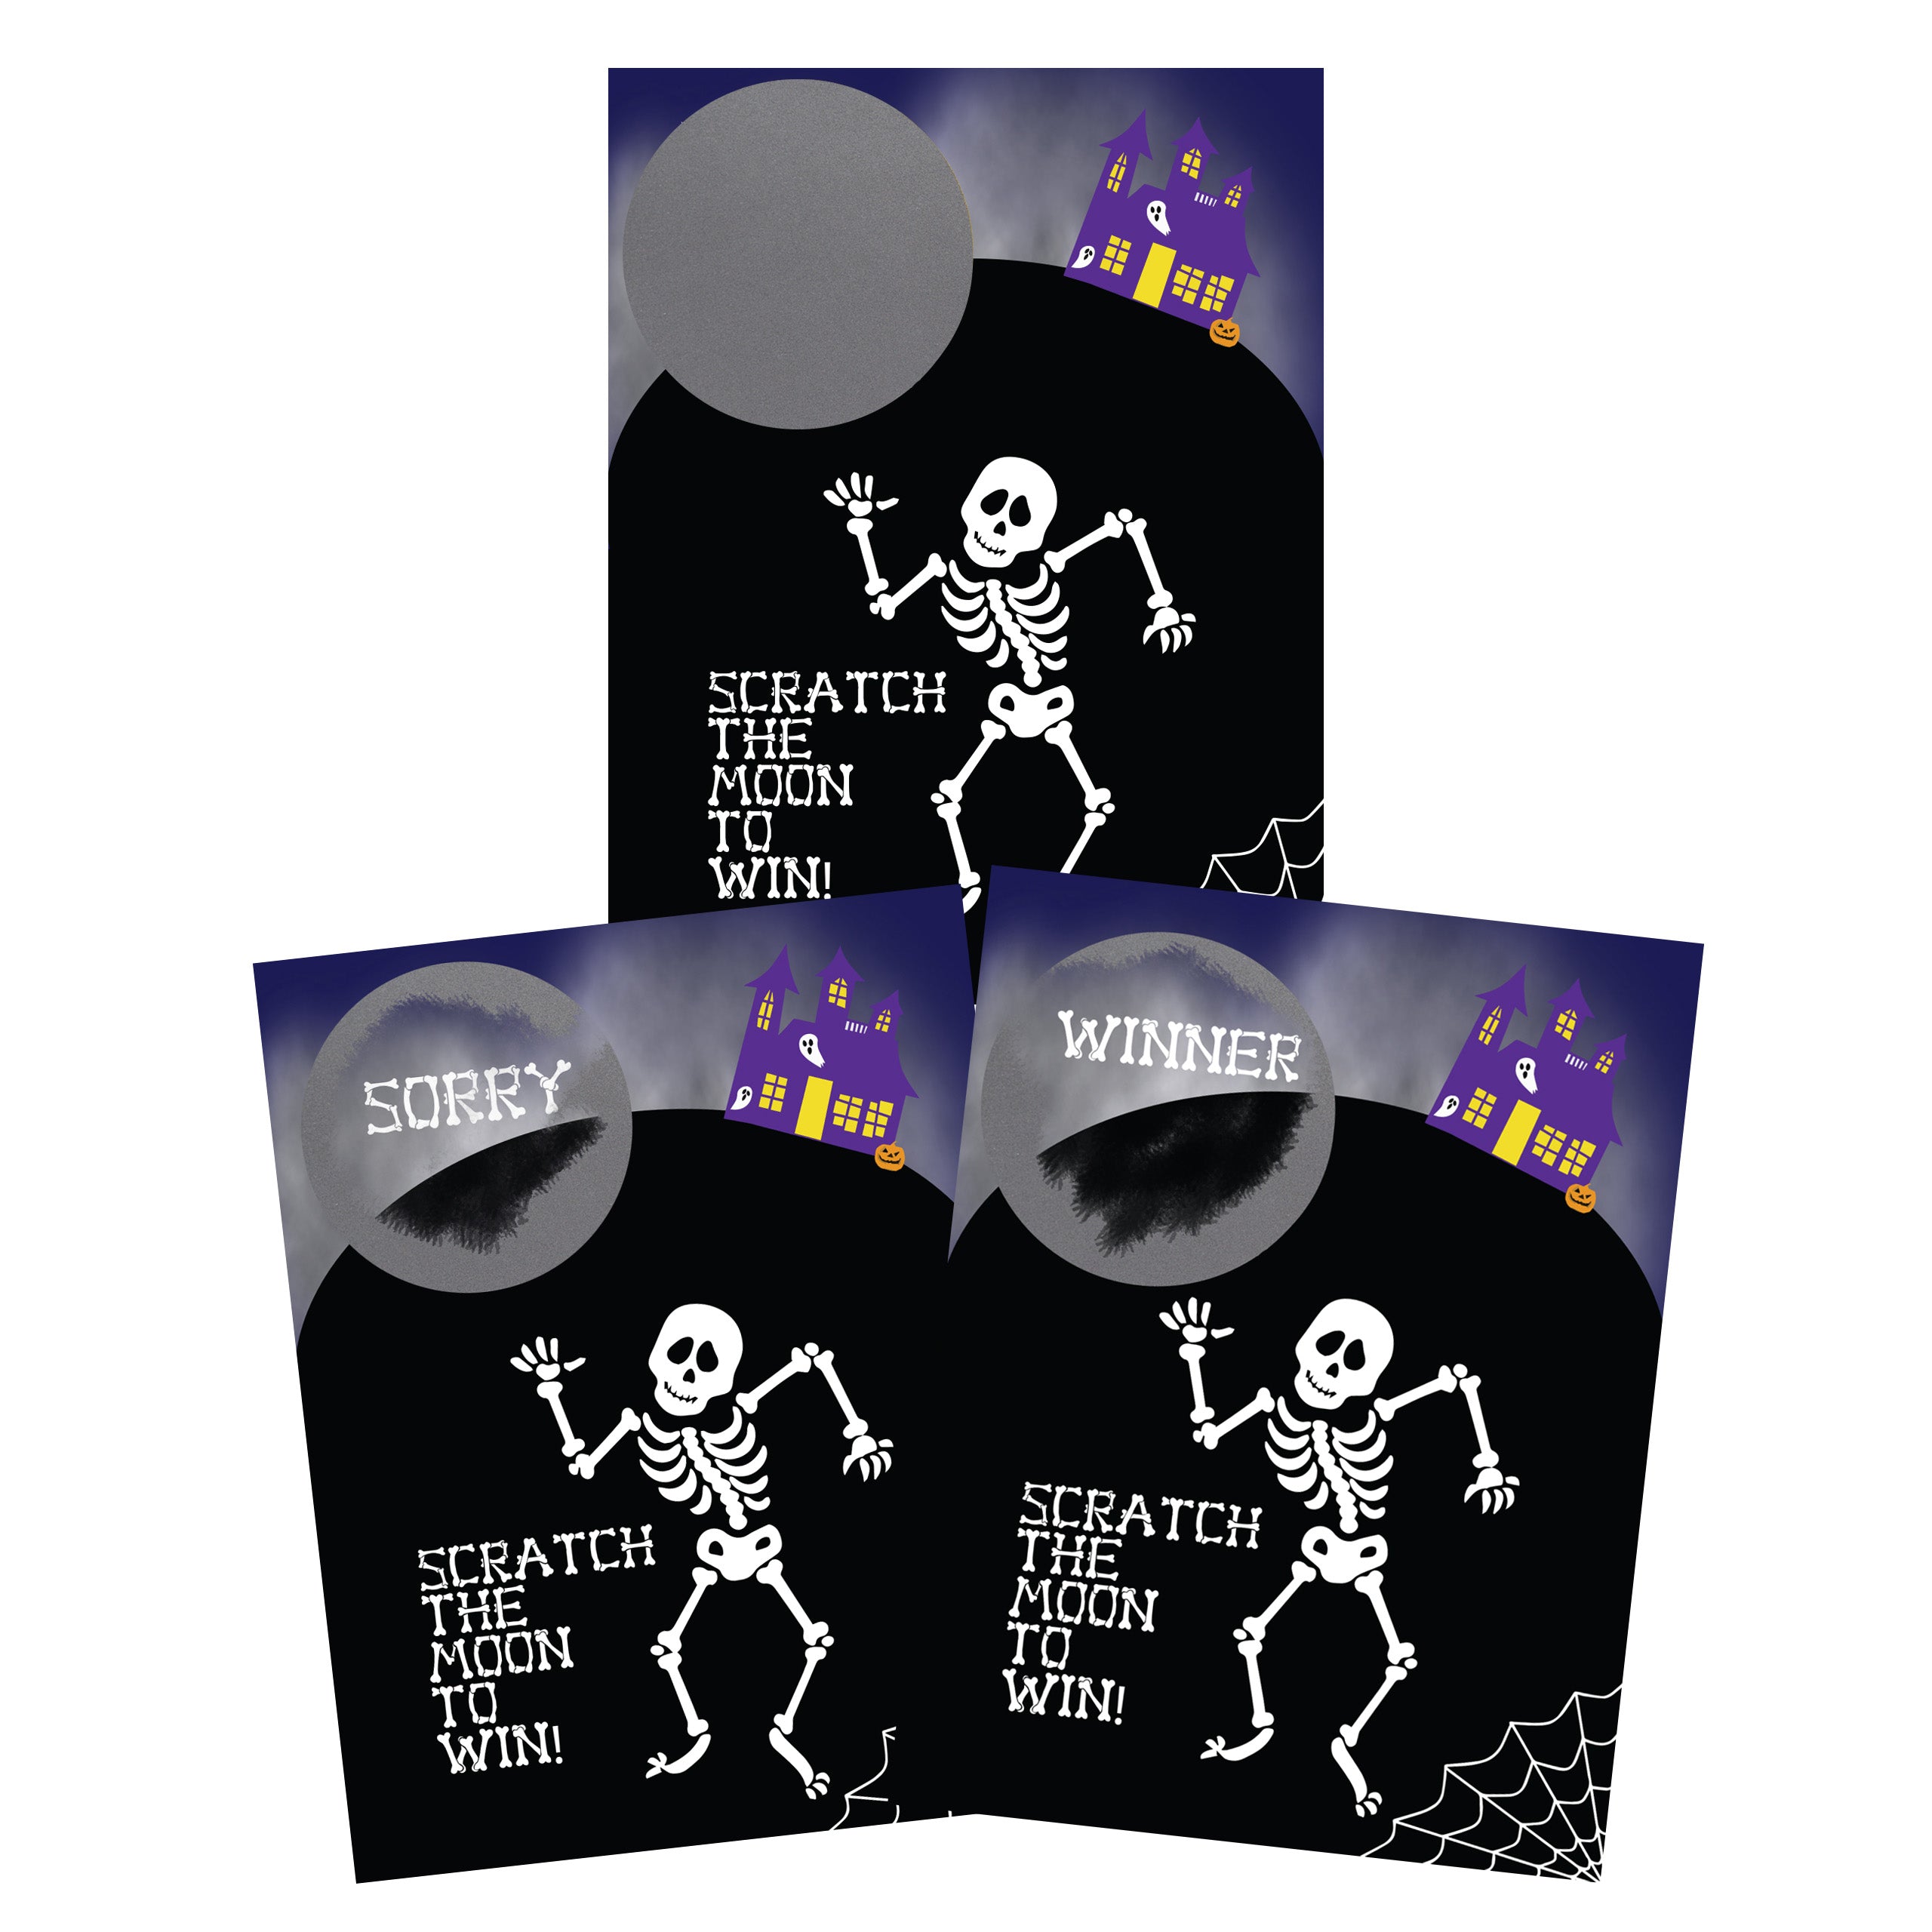 Halloween Spooky Skeleton Scratch Off Game 26 Pack - 2 Winning and 24 Non-Winning Cards - My Scratch Offs